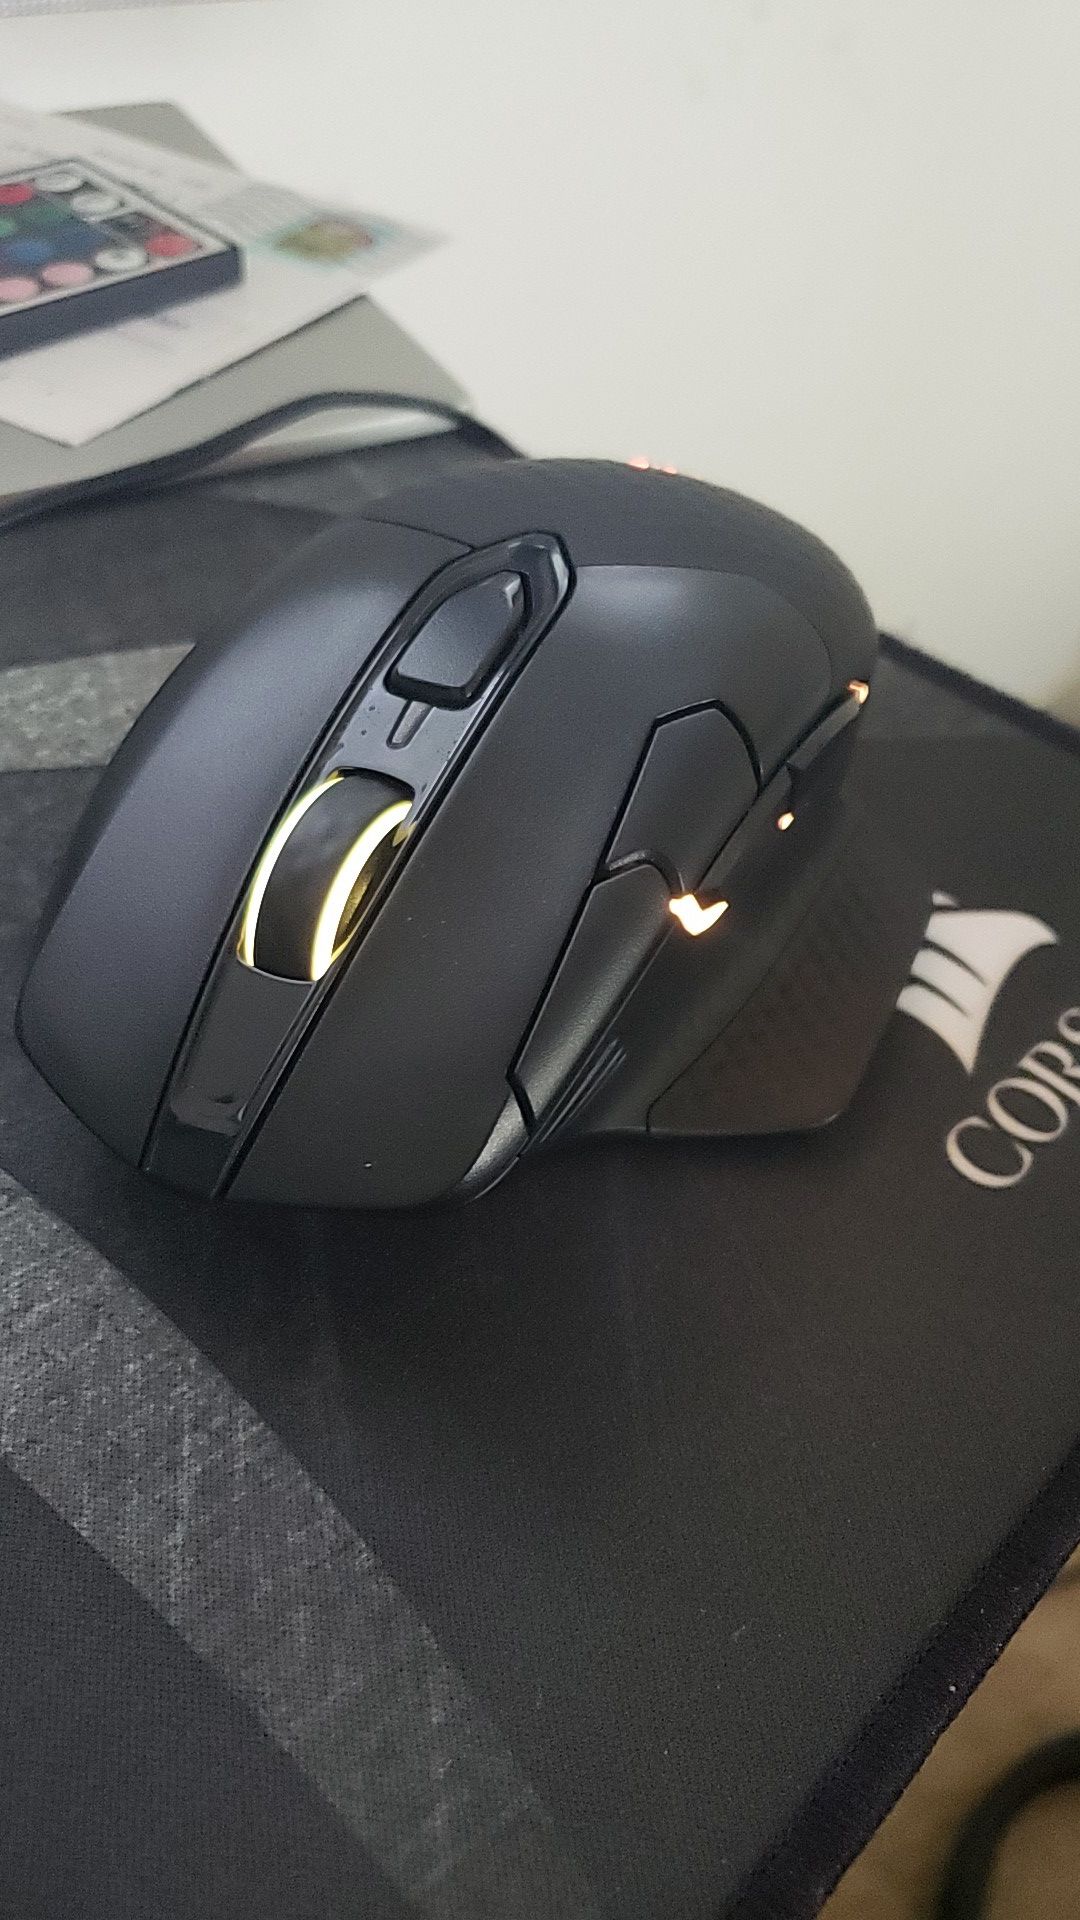 Corsair rgb wireless gaming mouse